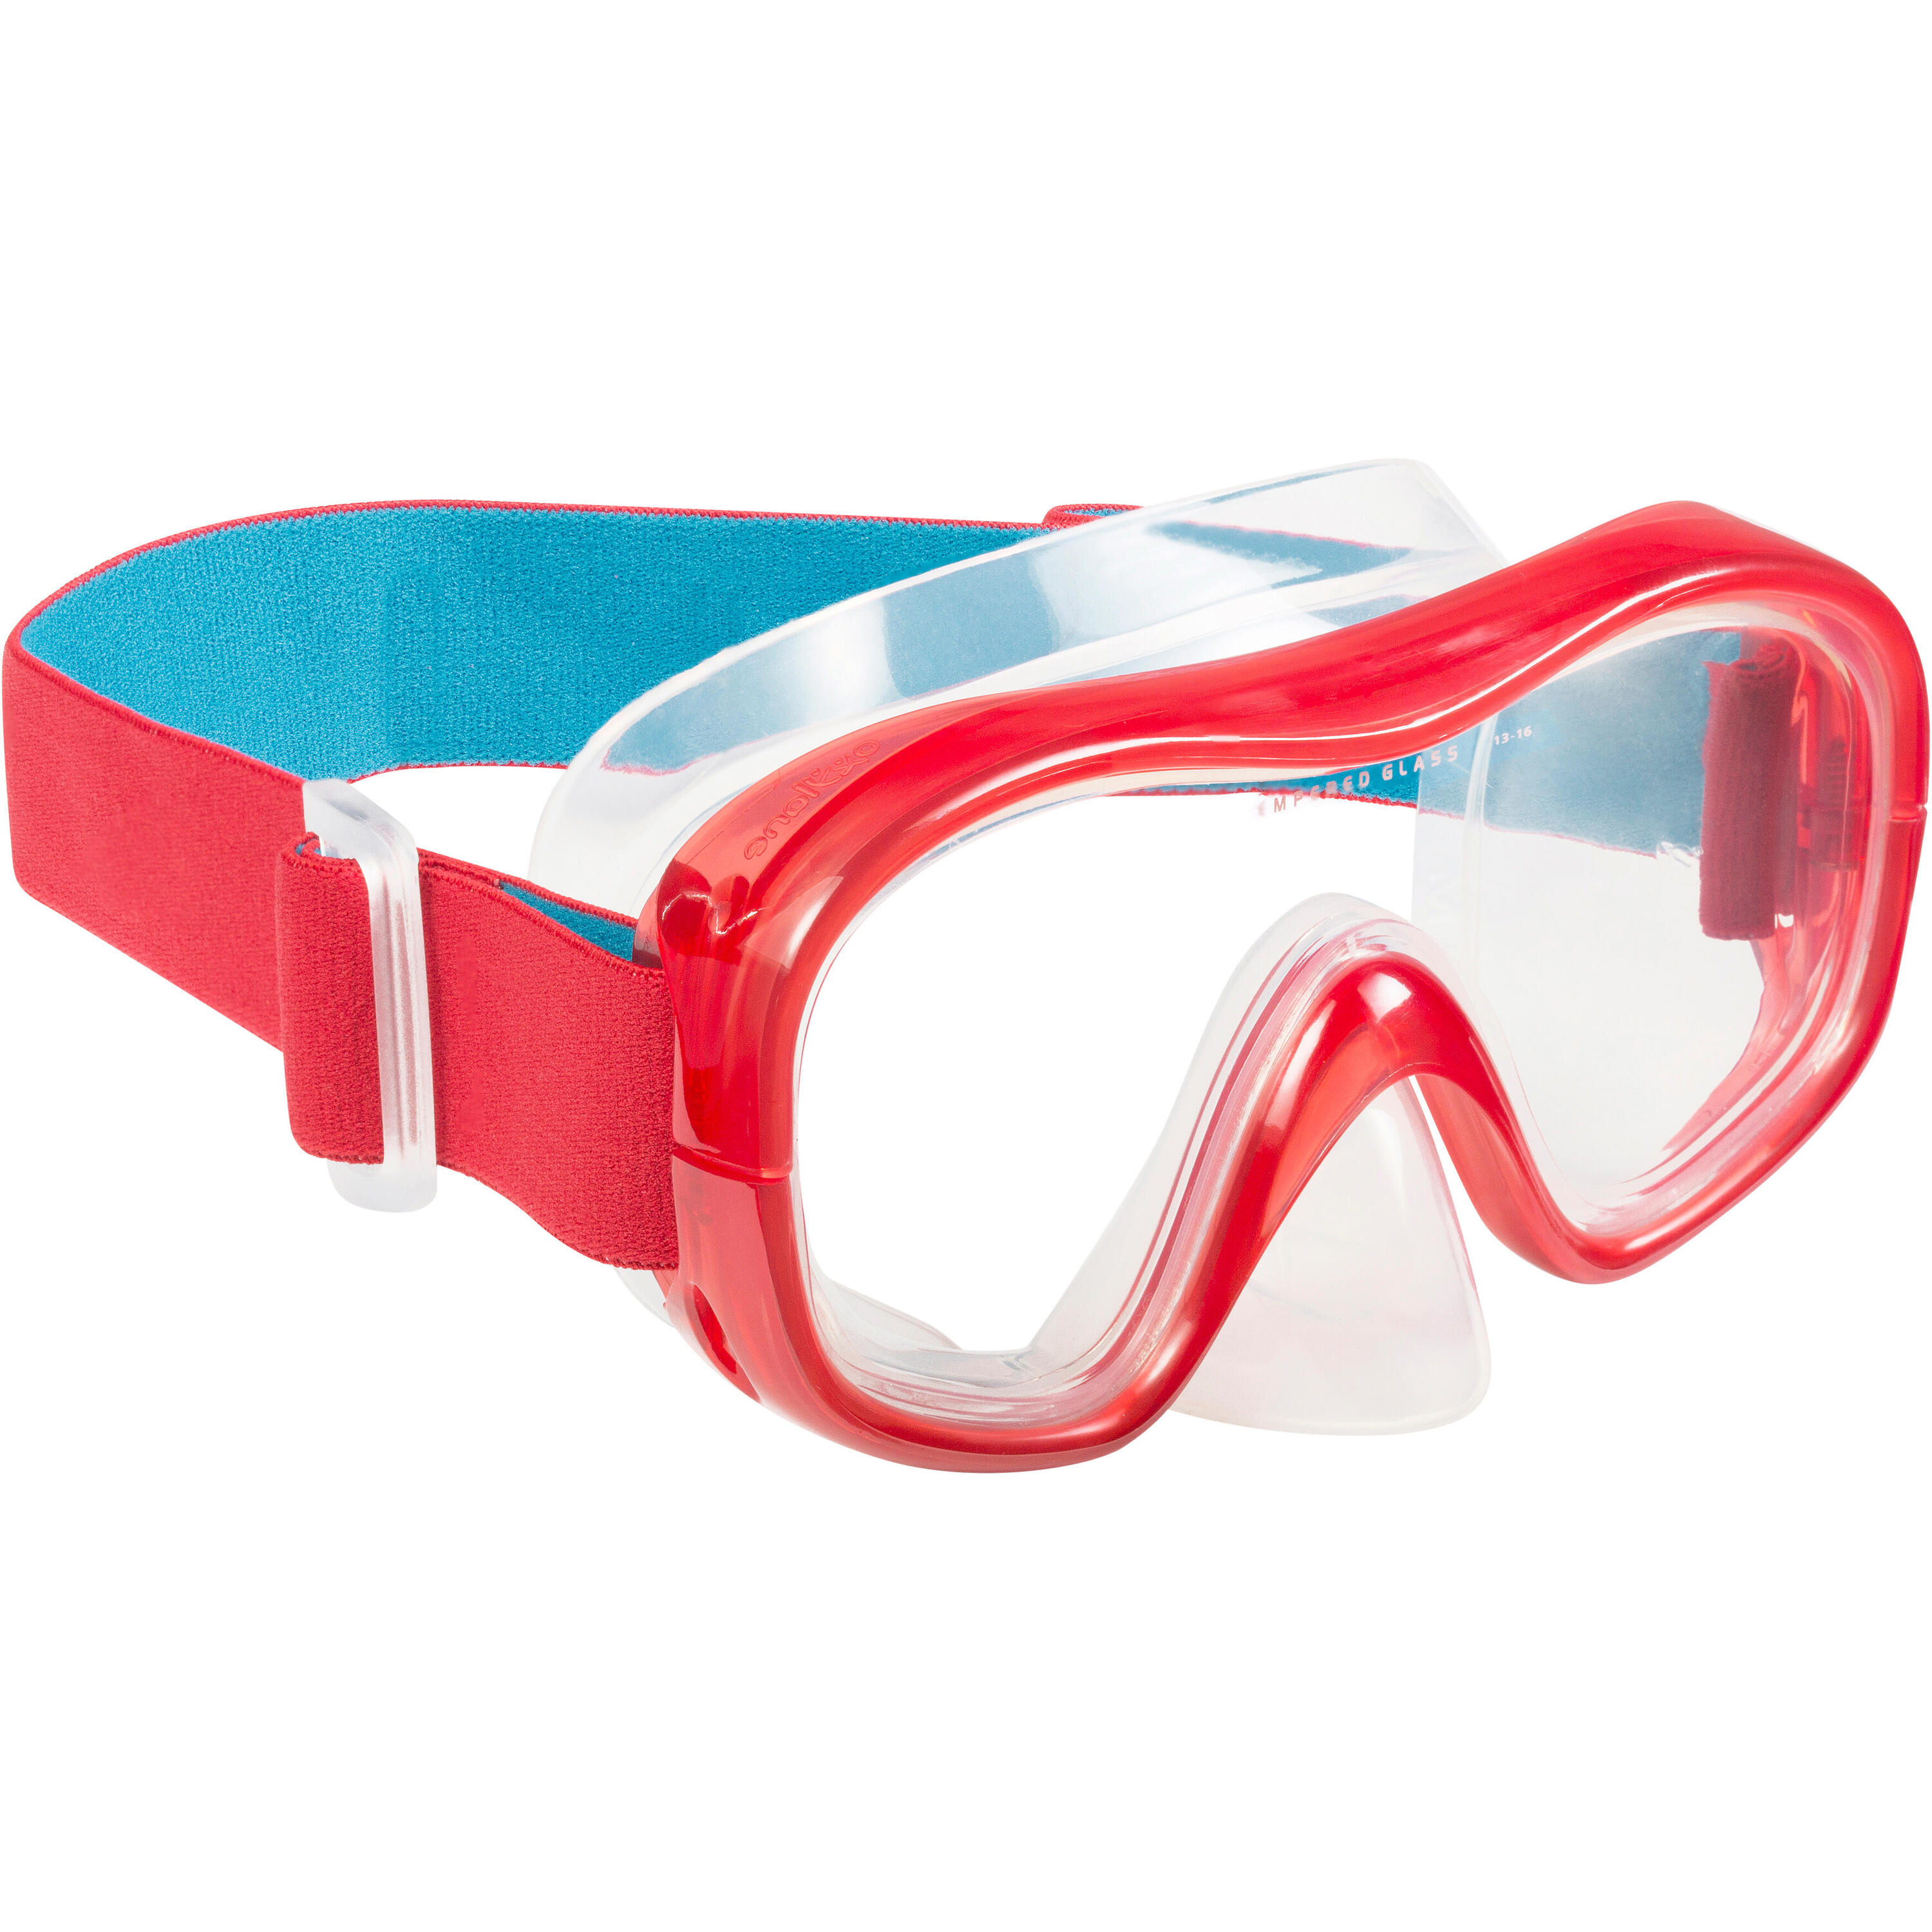 SUBEA FRD 120 freediving mask red turquoise